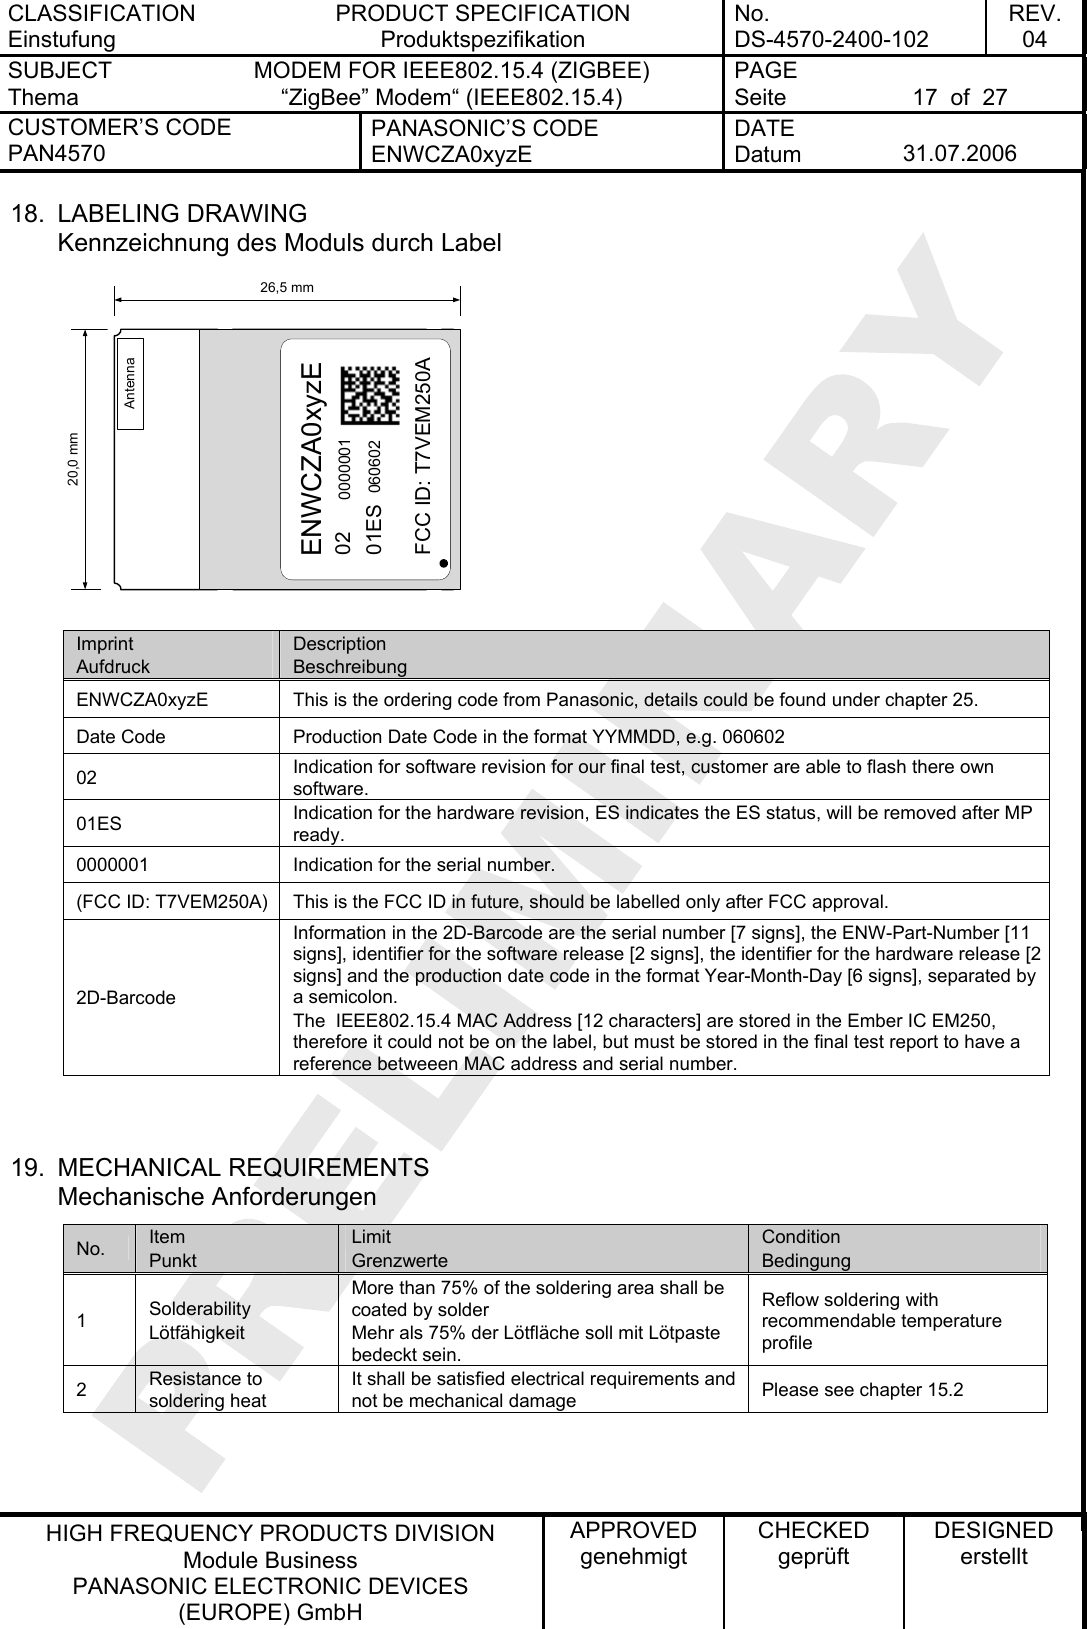 CLASSIFICATION Einstufung PRODUCT SPECIFICATION Produktspezifikation No. DS-4570-2400-102 REV. 04 SUBJECT Thema MODEM FOR IEEE802.15.4 (ZIGBEE) “ZigBee” Modem“ (IEEE802.15.4)   PAGE Seite  17  of  27 CUSTOMER’S CODE PAN4570 PANASONIC’S CODE ENWCZA0xyzE DATE Datum  31.07.2006   HIGH FREQUENCY PRODUCTS DIVISION Module Business PANASONIC ELECTRONIC DEVICES  (EUROPE) GmbH APPROVED genehmigt CHECKED geprüft DESIGNED erstellt 18. LABELING DRAWING Kennzeichnung des Moduls durch Label 26,5 mm20,0 mmAntennaENWCZA0xyzE0201ES0000001060602FCC ID: T7VEM250A Imprint Aufdruck Description Beschreibung ENWCZA0xyzE  This is the ordering code from Panasonic, details could be found under chapter 25. Date Code  Production Date Code in the format YYMMDD, e.g. 060602 02  Indication for software revision for our final test, customer are able to flash there own software. 01ES  Indication for the hardware revision, ES indicates the ES status, will be removed after MP ready. 0000001  Indication for the serial number. (FCC ID: T7VEM250A)  This is the FCC ID in future, should be labelled only after FCC approval. 2D-Barcode Information in the 2D-Barcode are the serial number [7 signs], the ENW-Part-Number [11 signs], identifier for the software release [2 signs], the identifier for the hardware release [2 signs] and the production date code in the format Year-Month-Day [6 signs], separated by a semicolon. The  IEEE802.15.4 MAC Address [12 characters] are stored in the Ember IC EM250, therefore it could not be on the label, but must be stored in the final test report to have a reference betweeen MAC address and serial number.   19. MECHANICAL REQUIREMENTS Mechanische Anforderungen No.  Item Punkt Limit Grenzwerte Condition Bedingung 1  Solderability Lötfähigkeit More than 75% of the soldering area shall be coated by solder Mehr als 75% der Lötfläche soll mit Lötpaste bedeckt sein. Reflow soldering with recommendable temperature profile 2  Resistance to soldering heat It shall be satisfied electrical requirements and not be mechanical damage  Please see chapter 15.2   